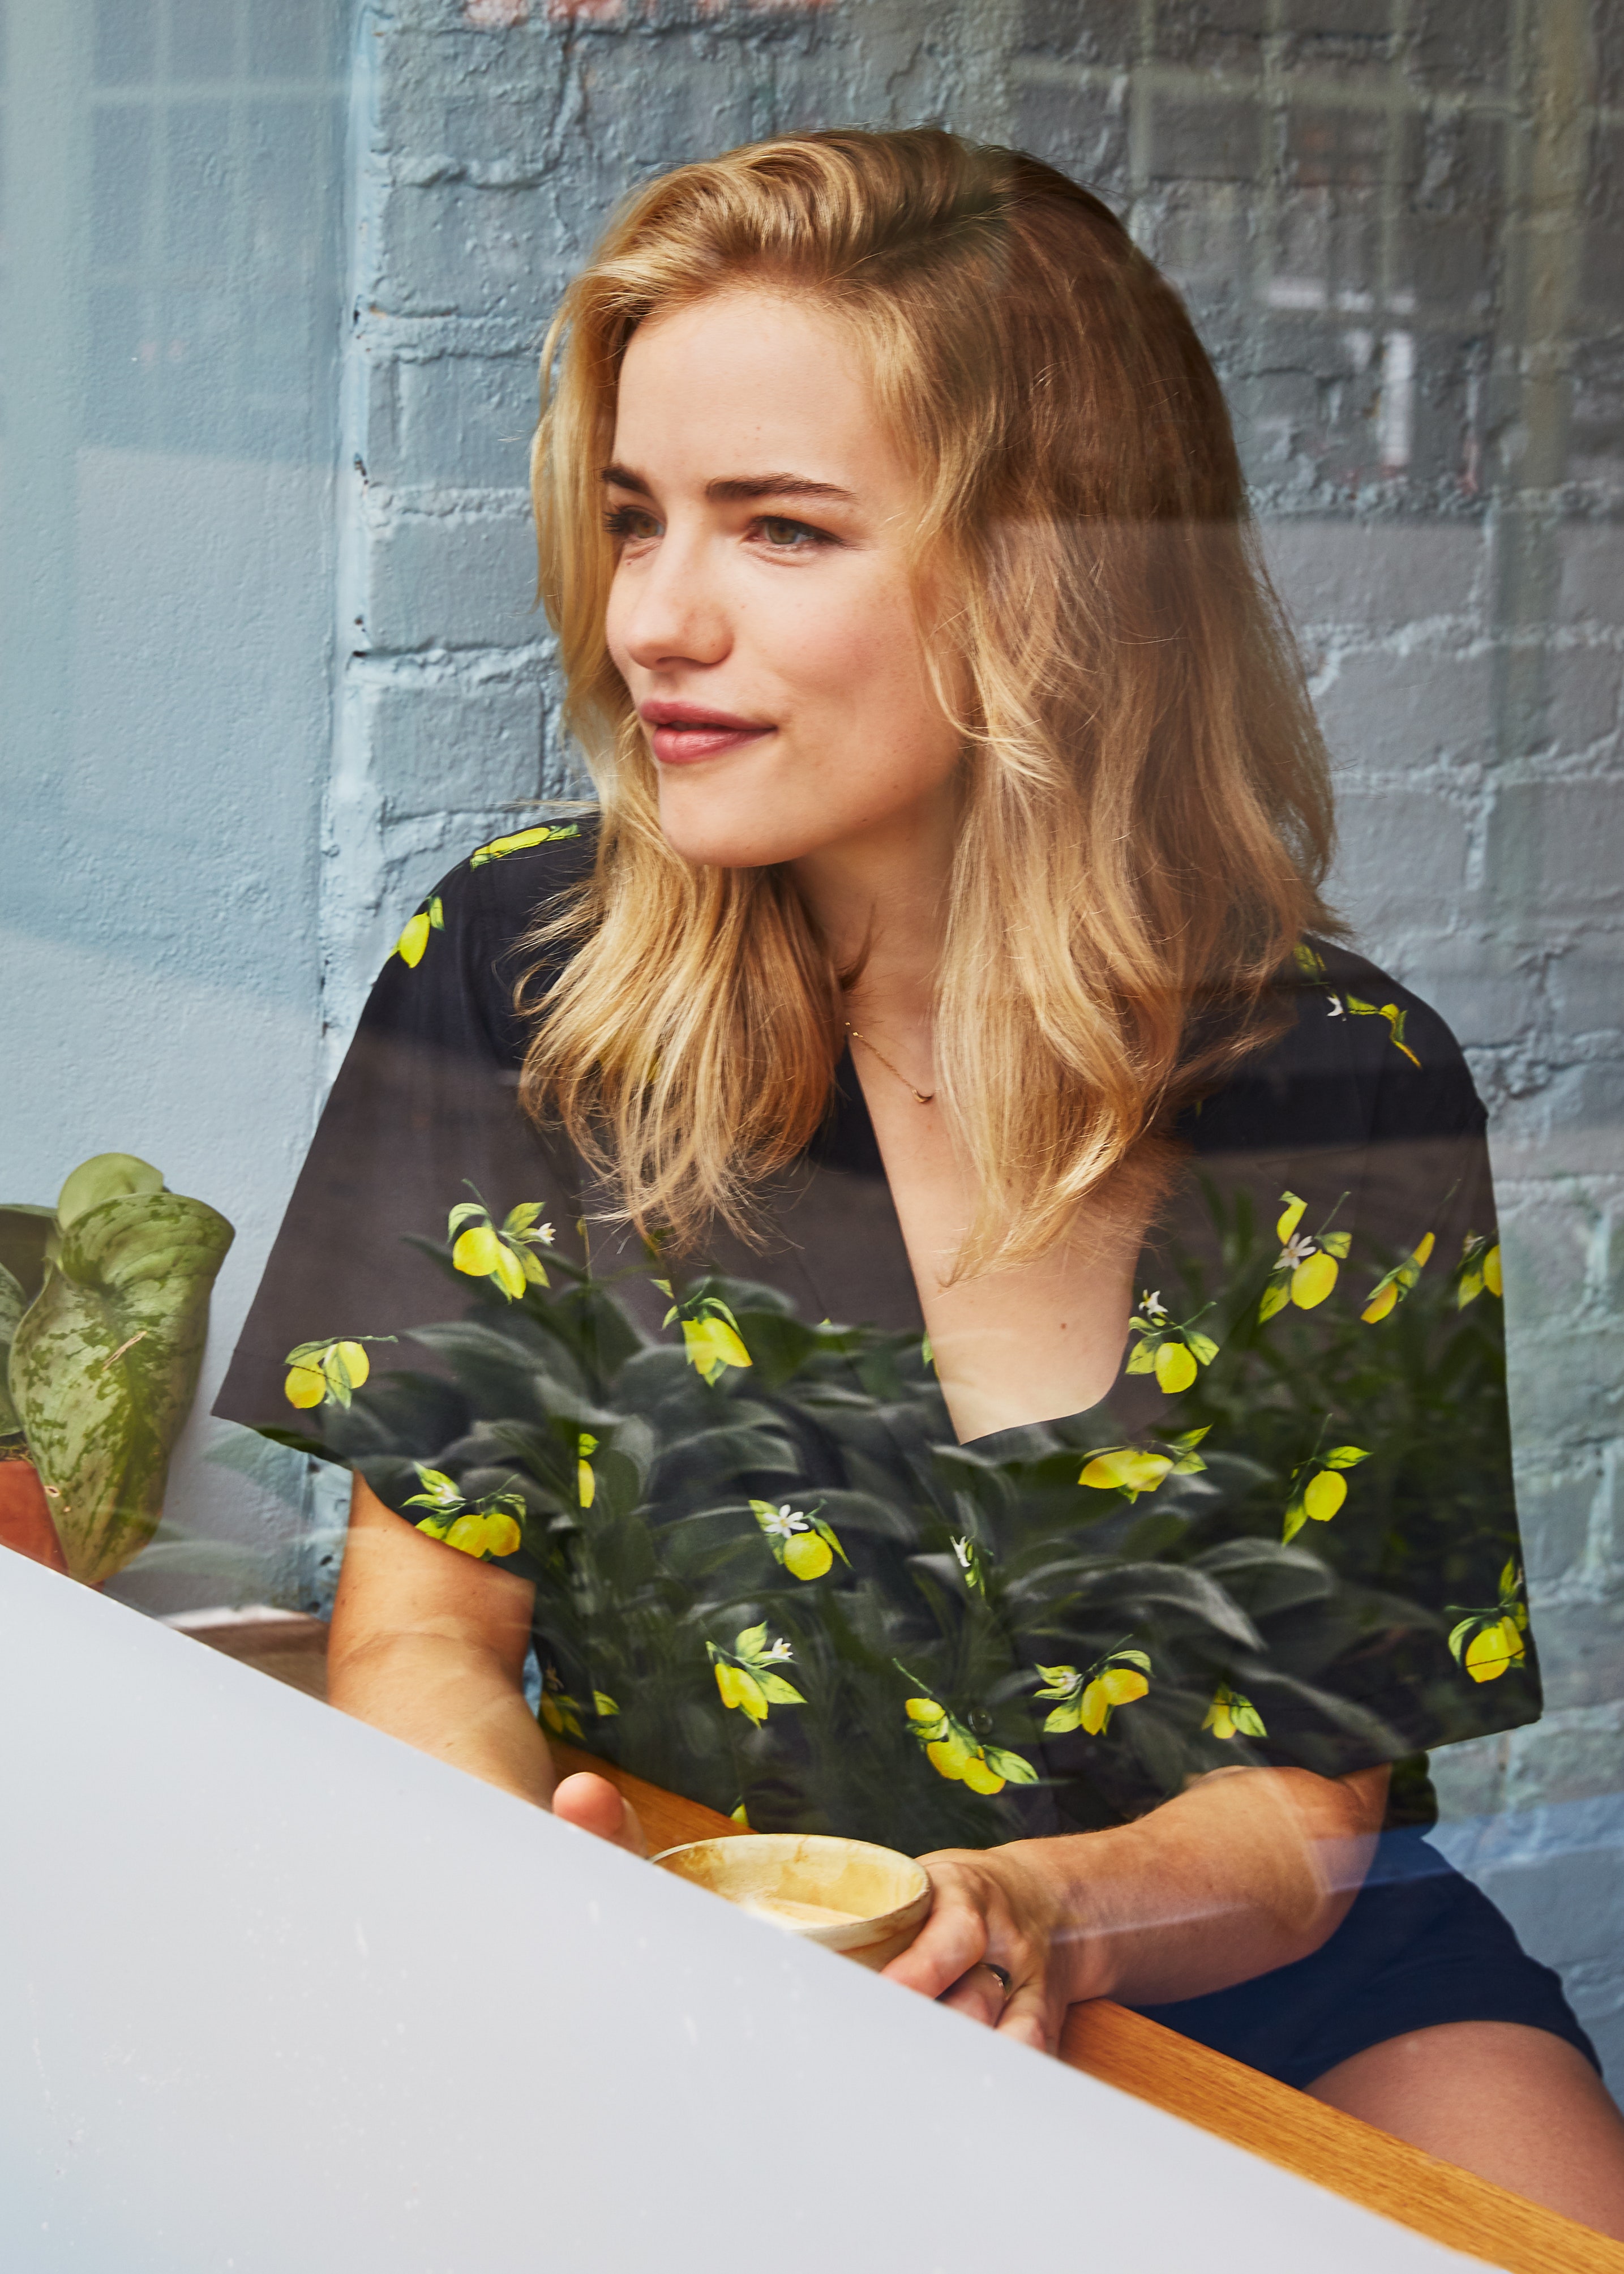 Willa Fitzgerald Photoshoot 2018 Wallpapers